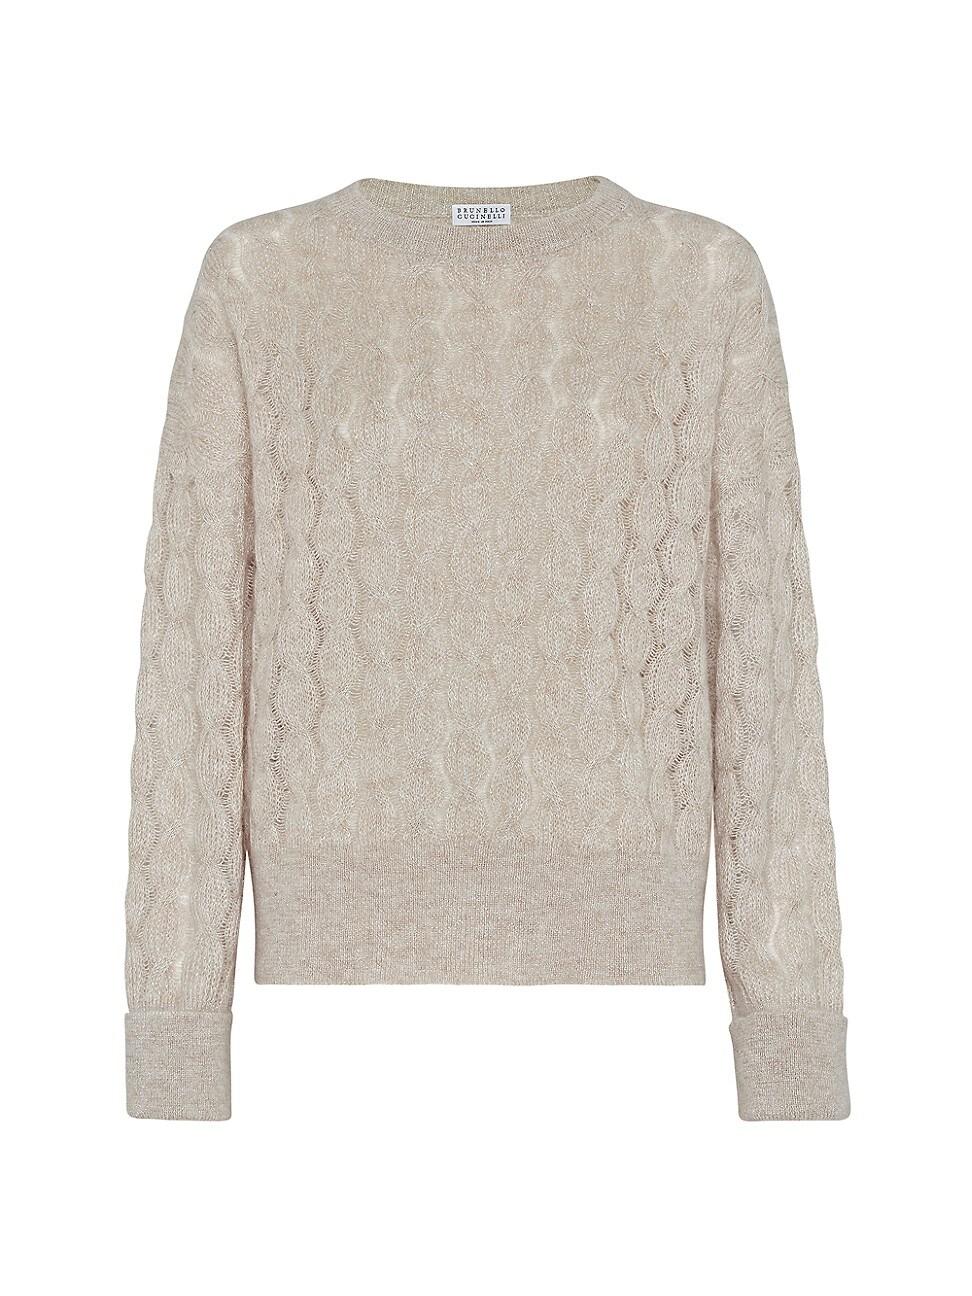 Brunello Cucinelli Sparkling Mohair And Wool Cable Knit Sweater in ...